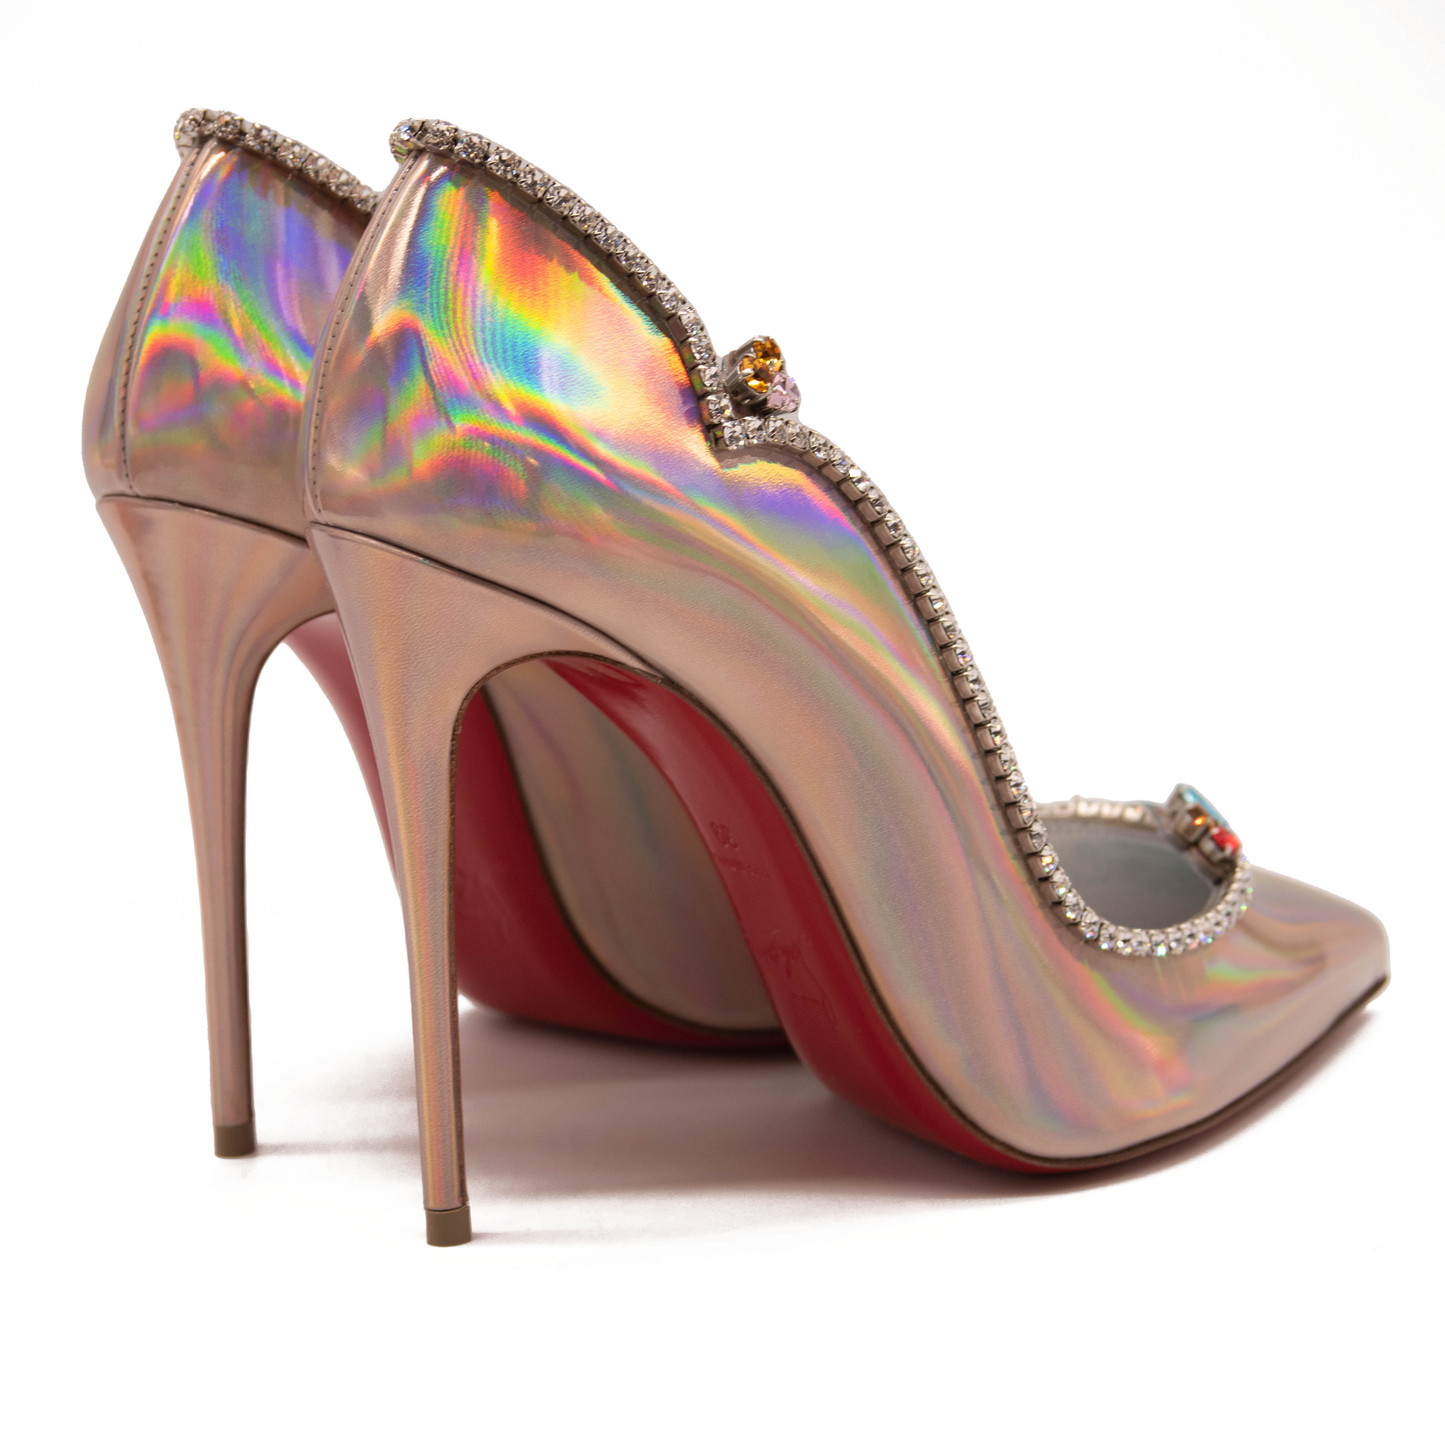 NEW Christian Louboutin Chick Queen Pointed Toe Pump Wood Rose 38 EU